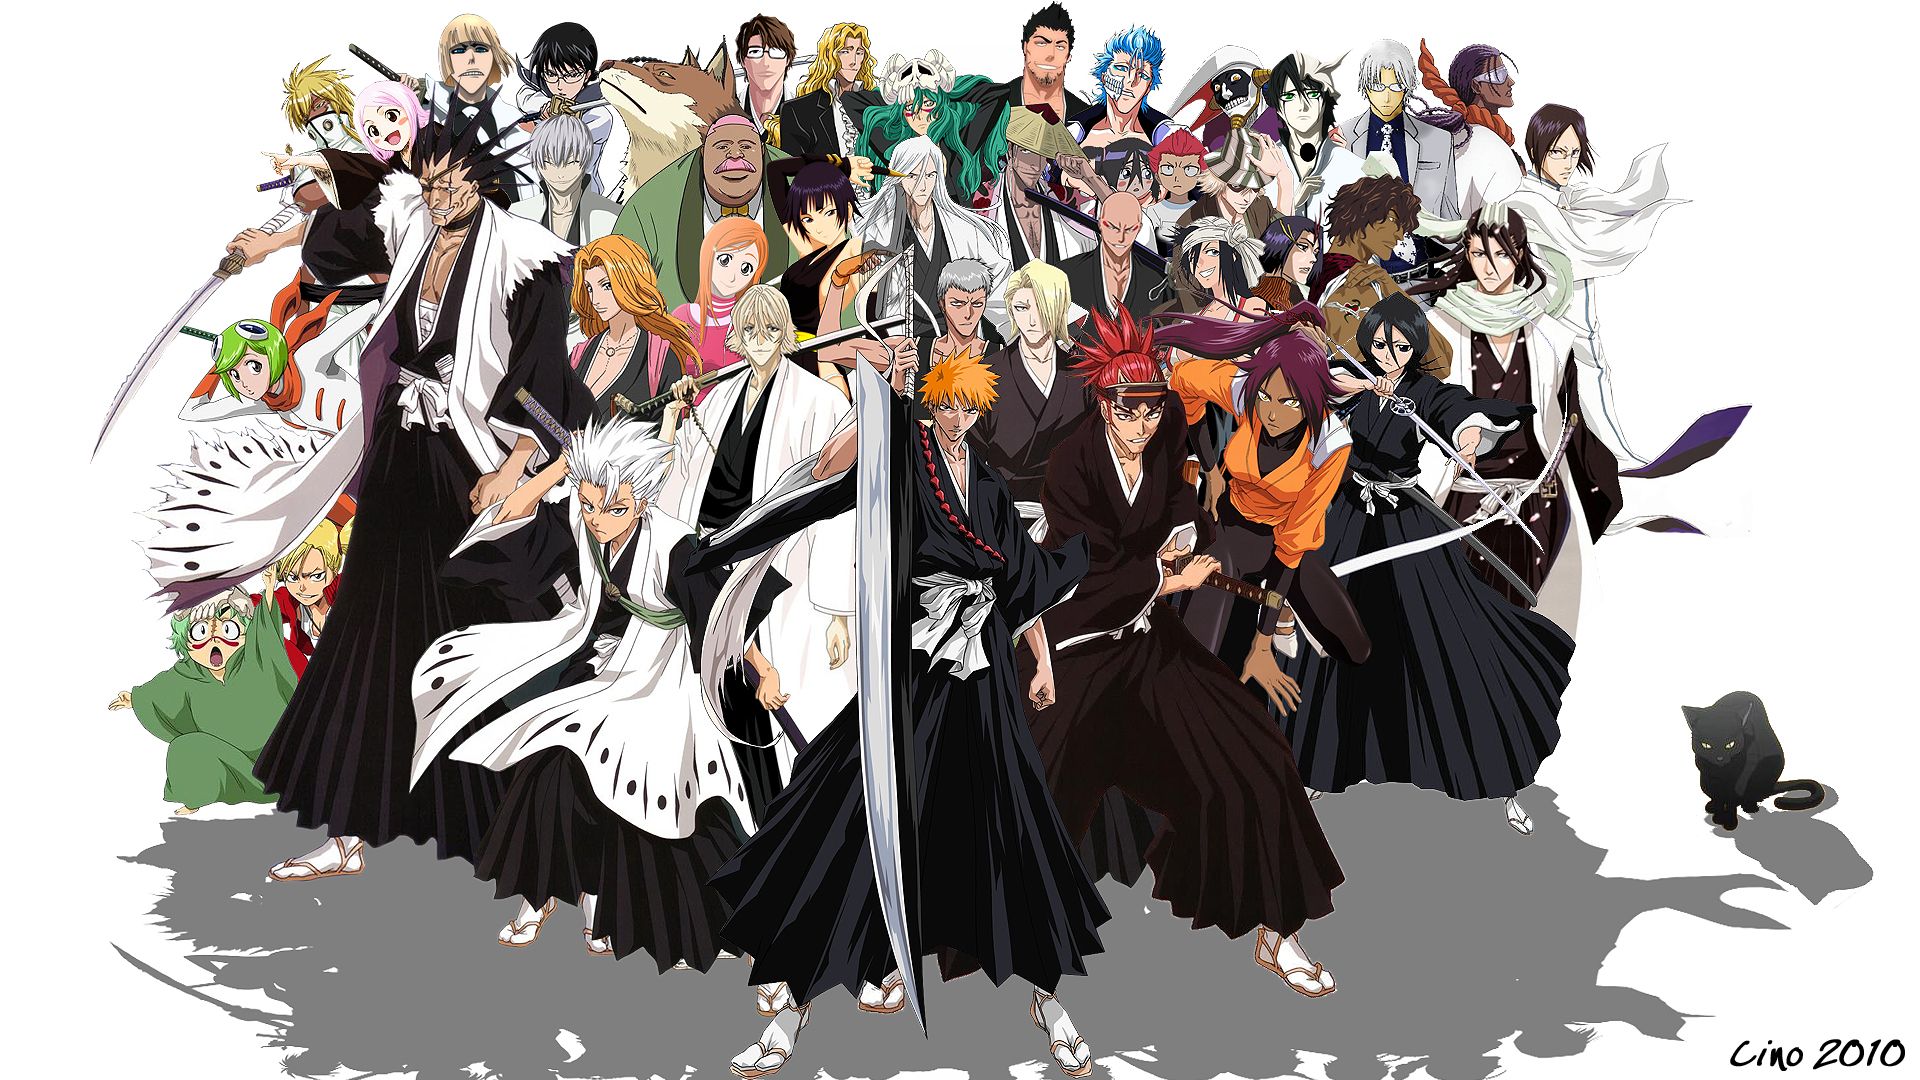 1920x1080px Wallpaper Bleach All Characters | #512488